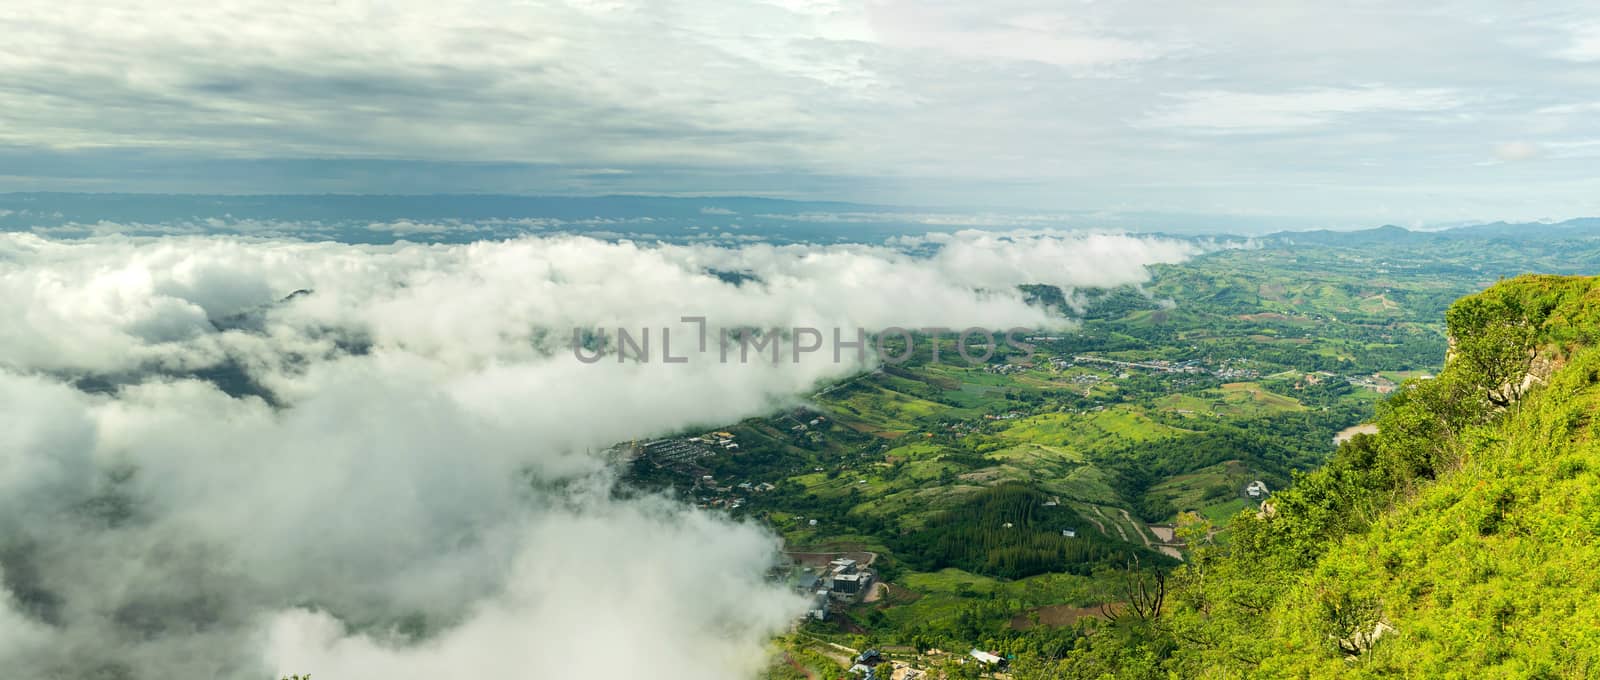 Panoramic view of the clouds covering the city. by wattanaphob